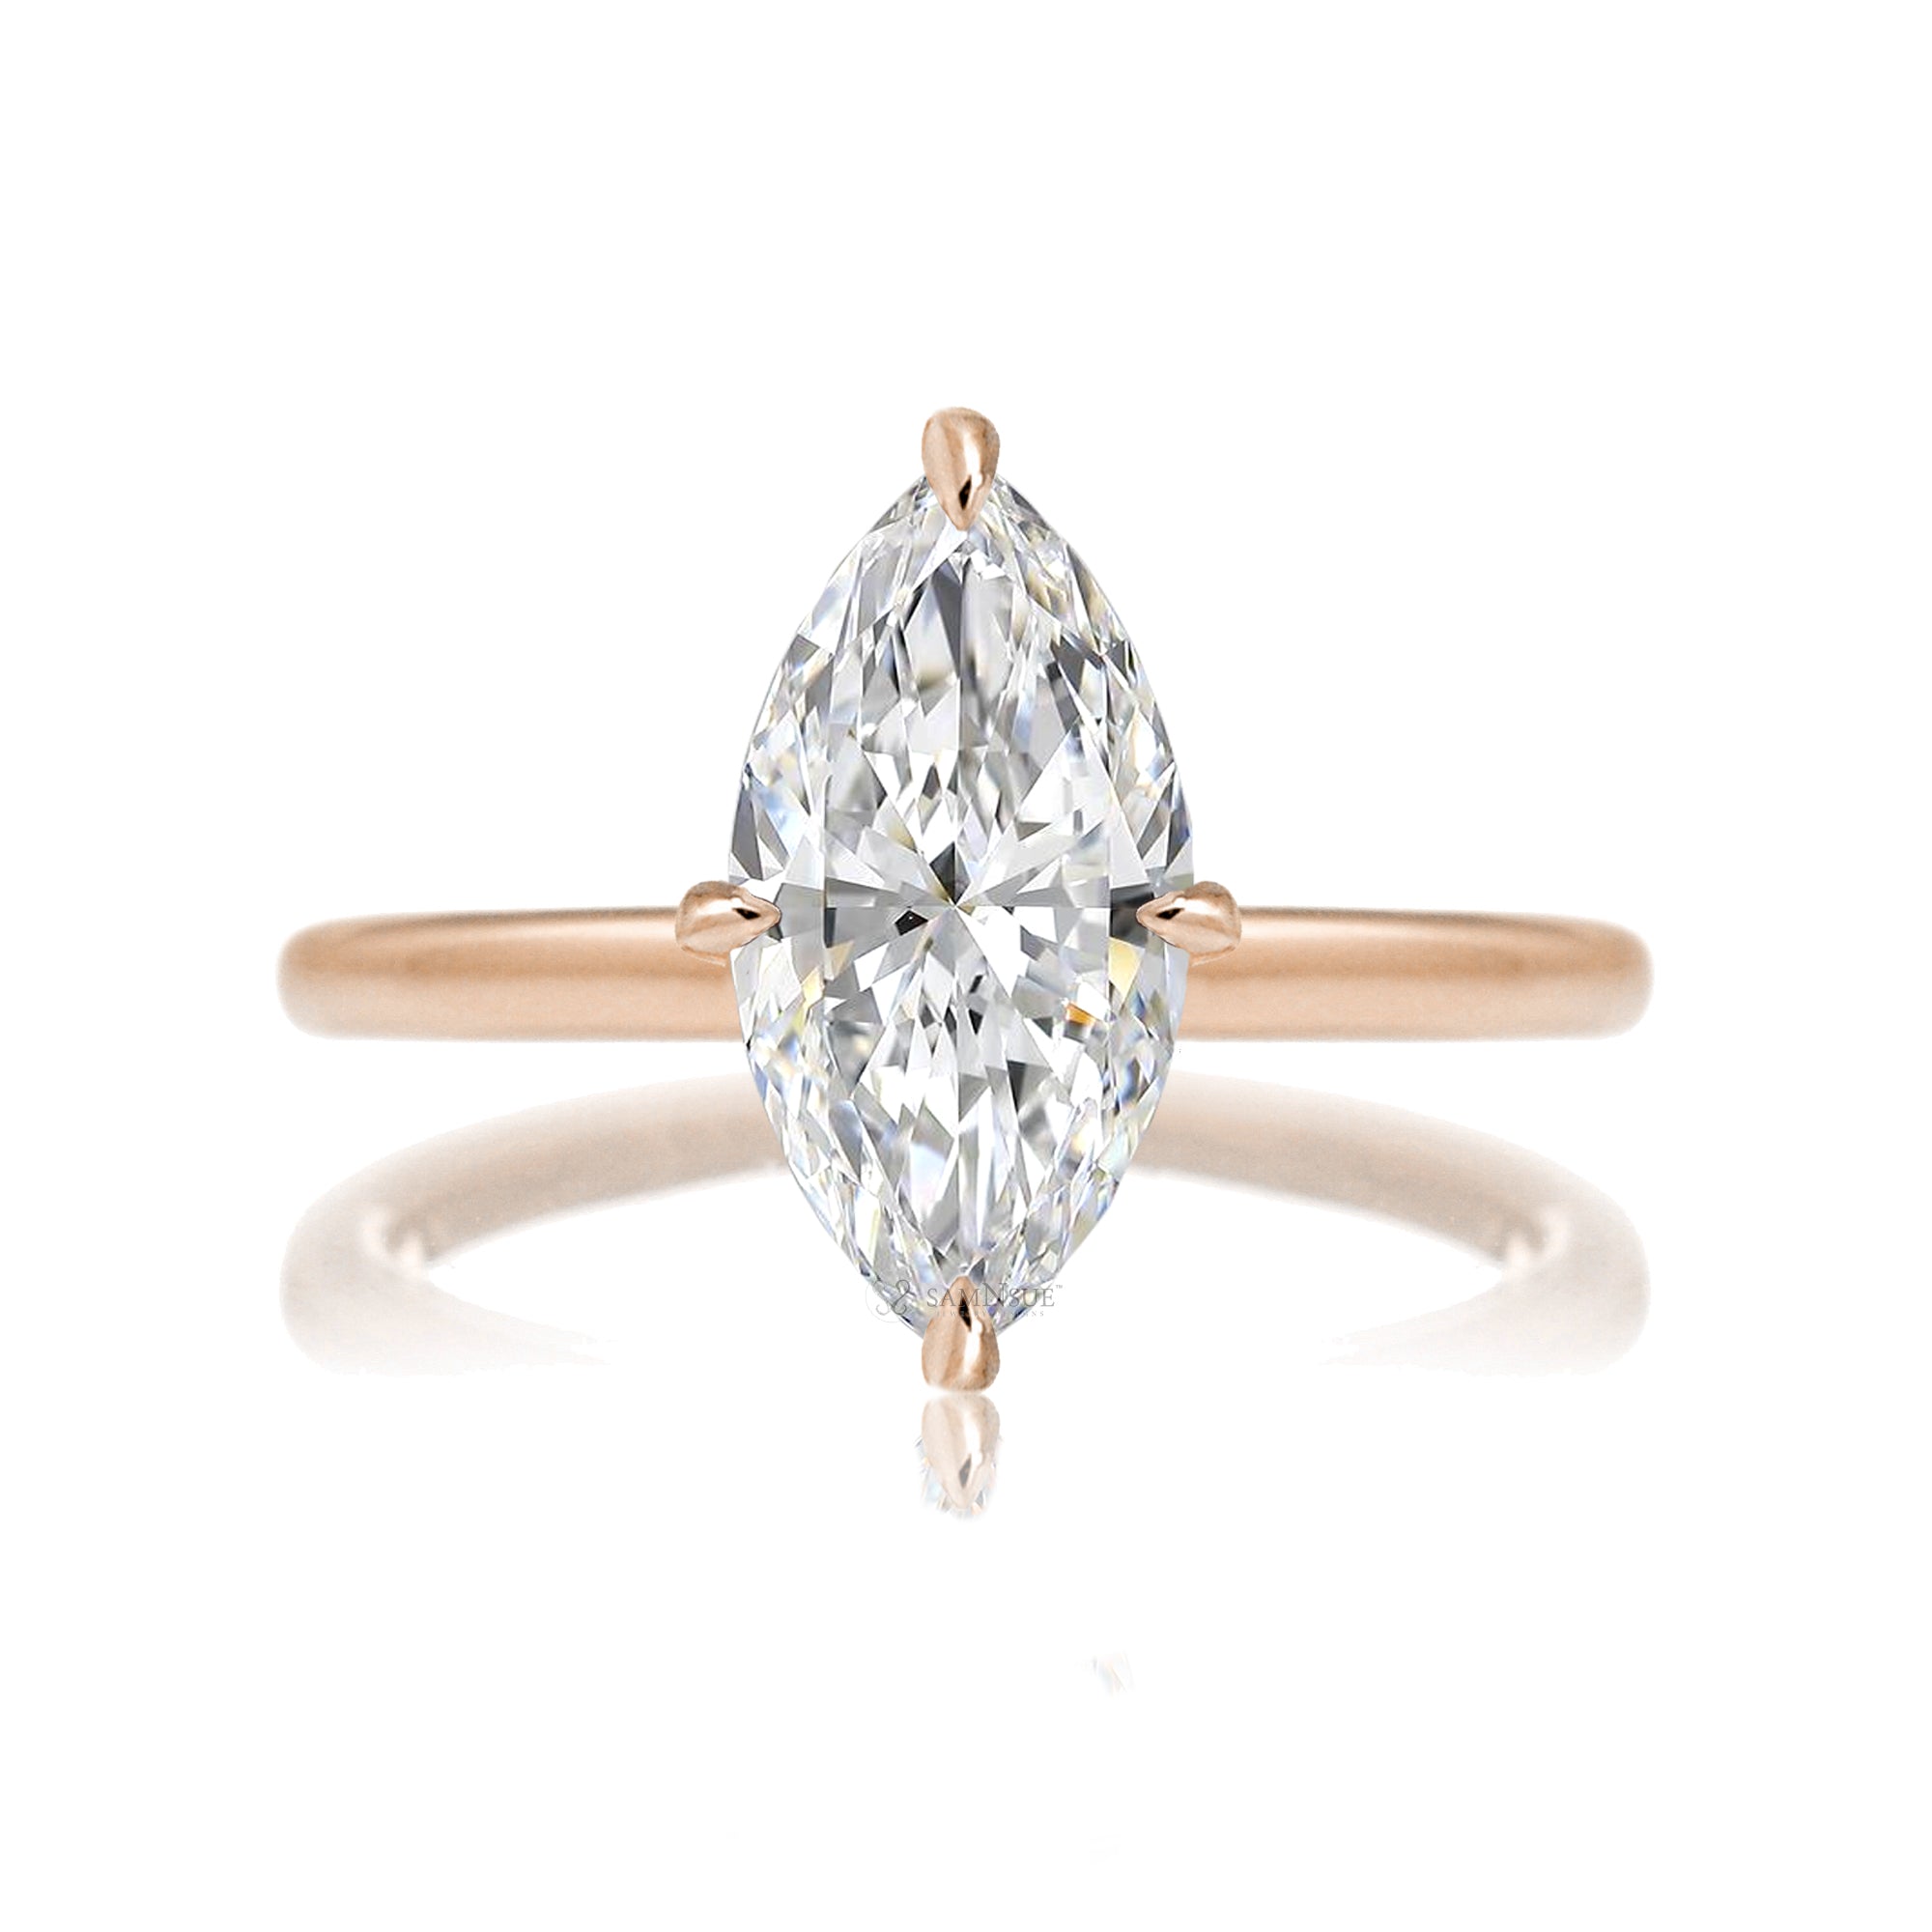 Marquise cut solitaire diamond engagement ring with a hidden halo and solid polished band in rose gold